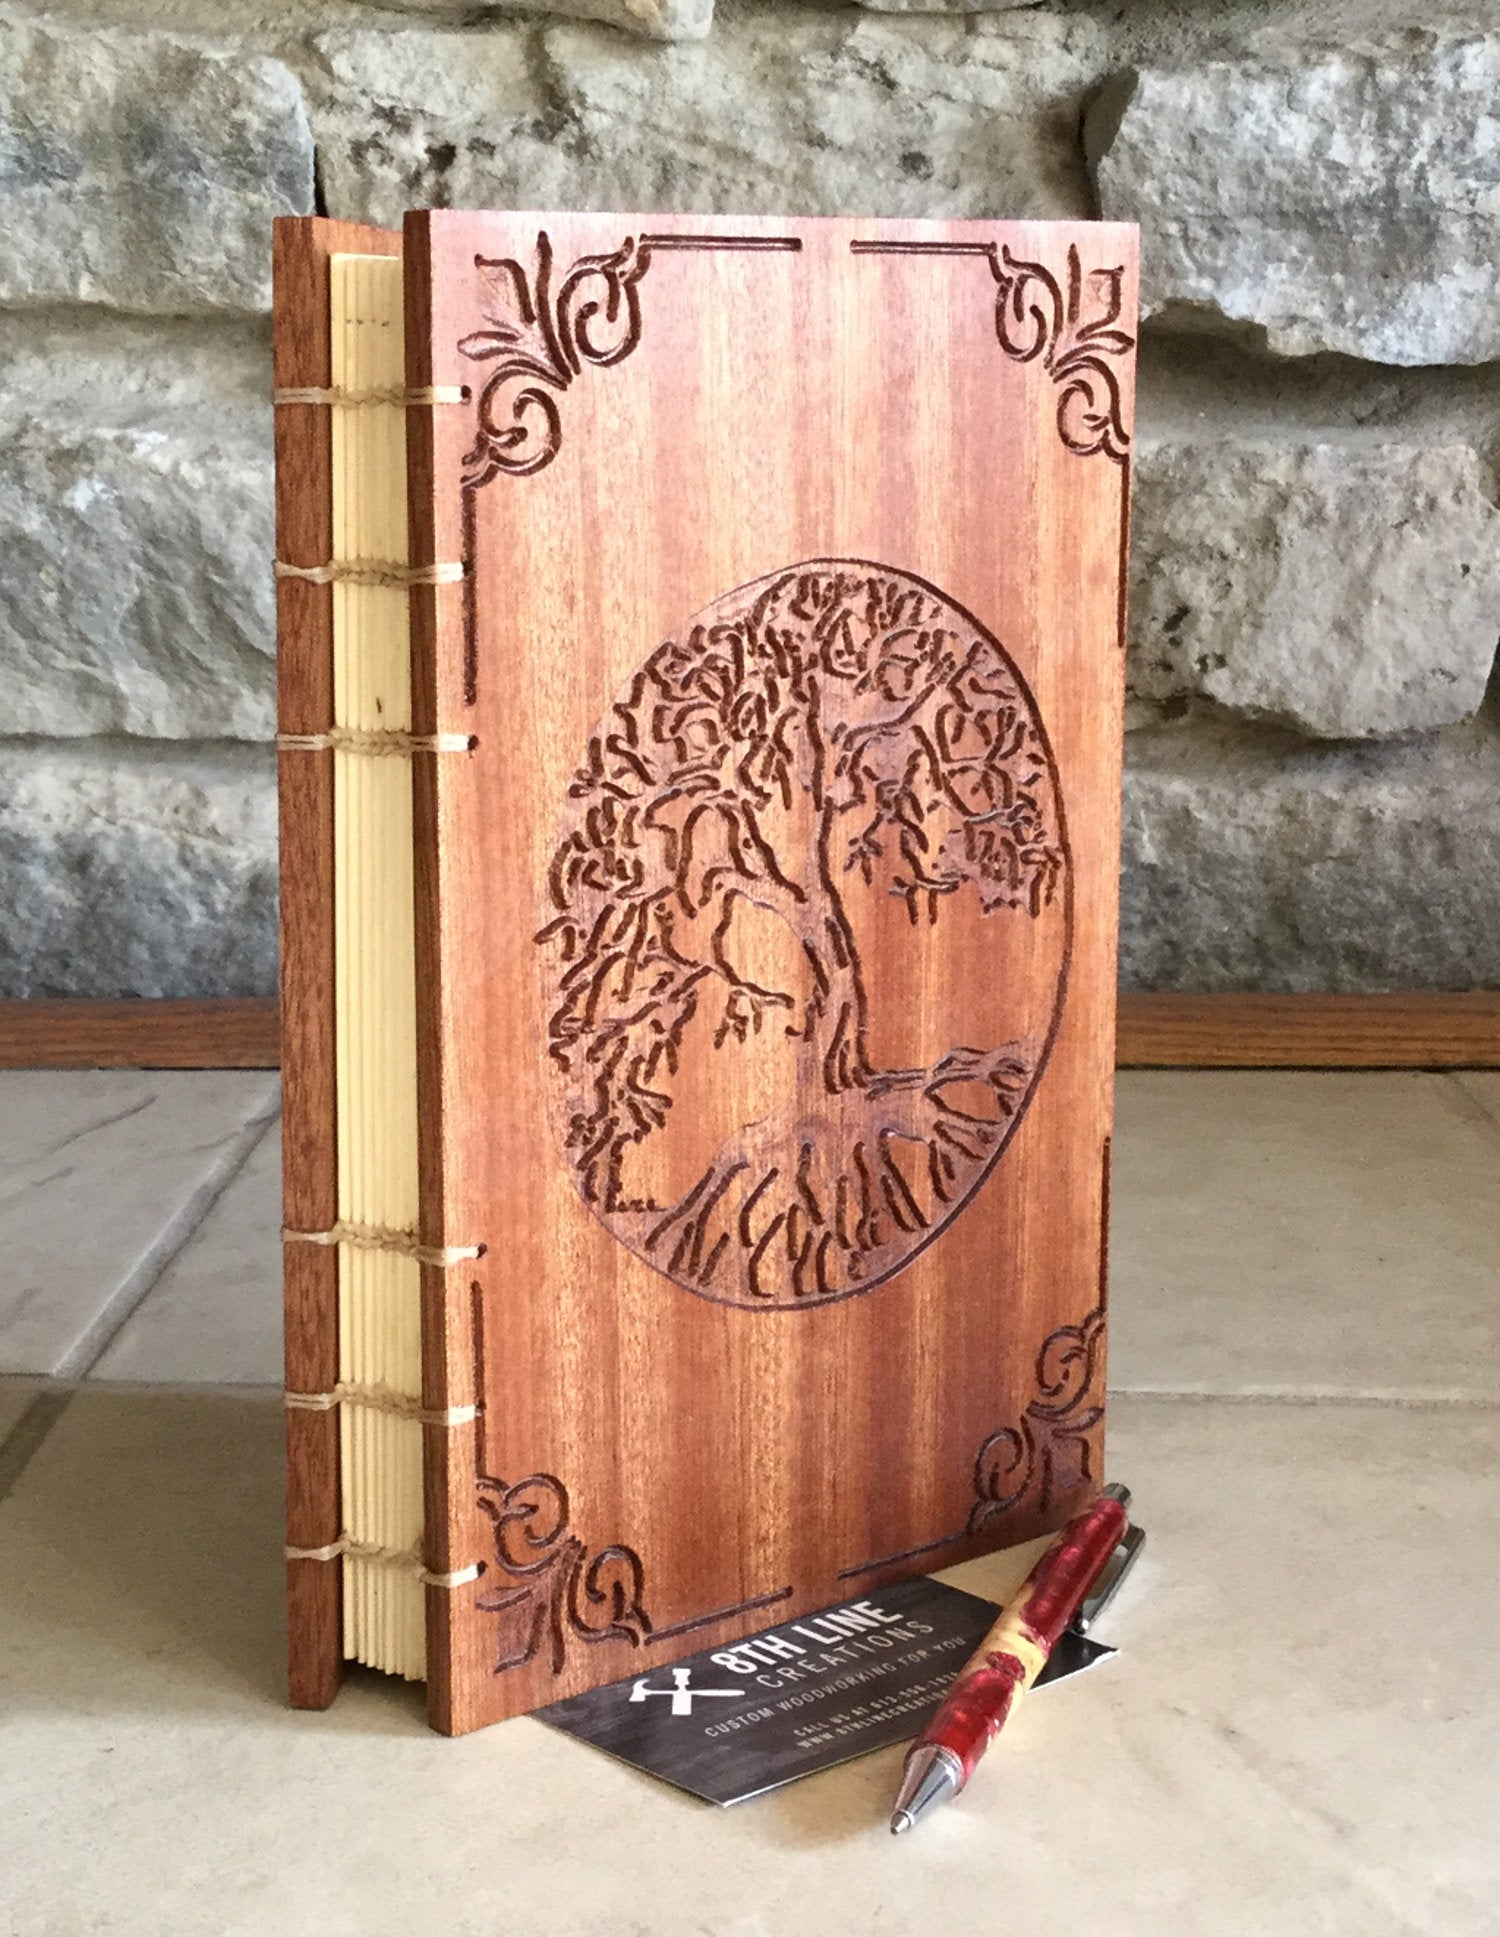 Guest Books - Coptic Stitched - Sapele (Mahogany) Custom Carved Diaries, Guest Books, Journals and Notebooks 8th Line Creations 